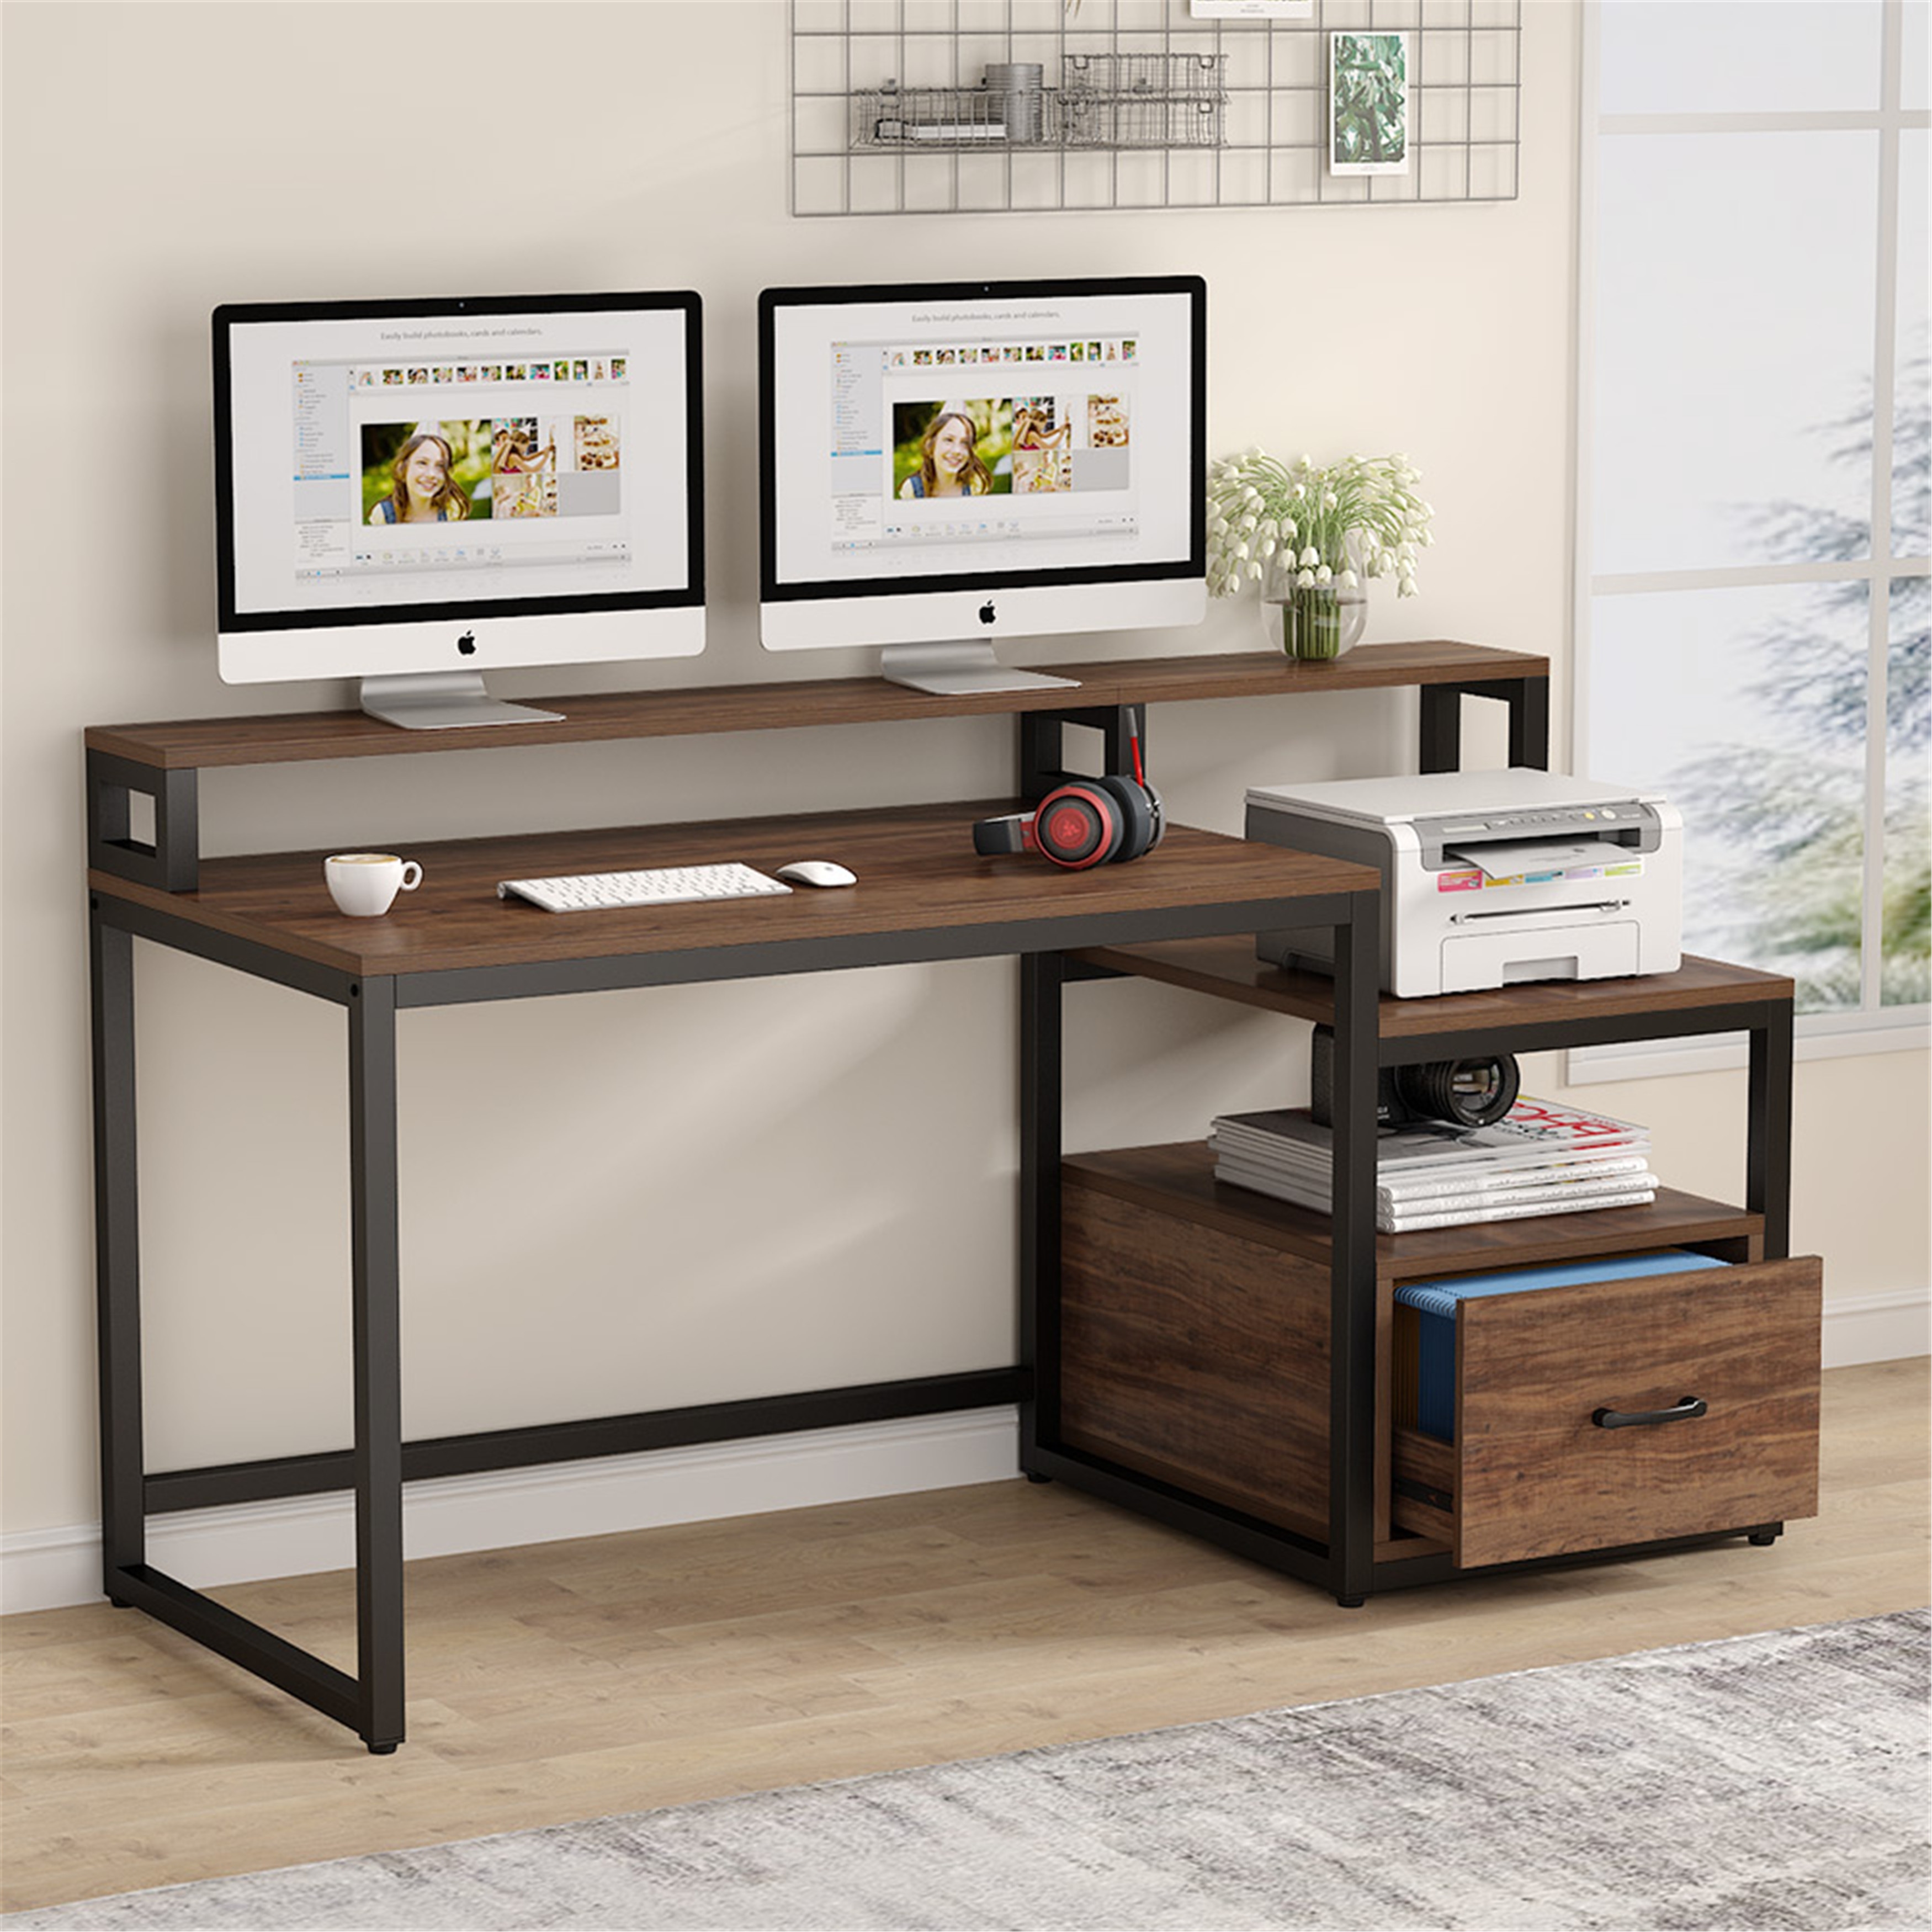 Monitor Stand and Storage Shelves OUTFINE Desk Computer Desk Office Desk with Drawer